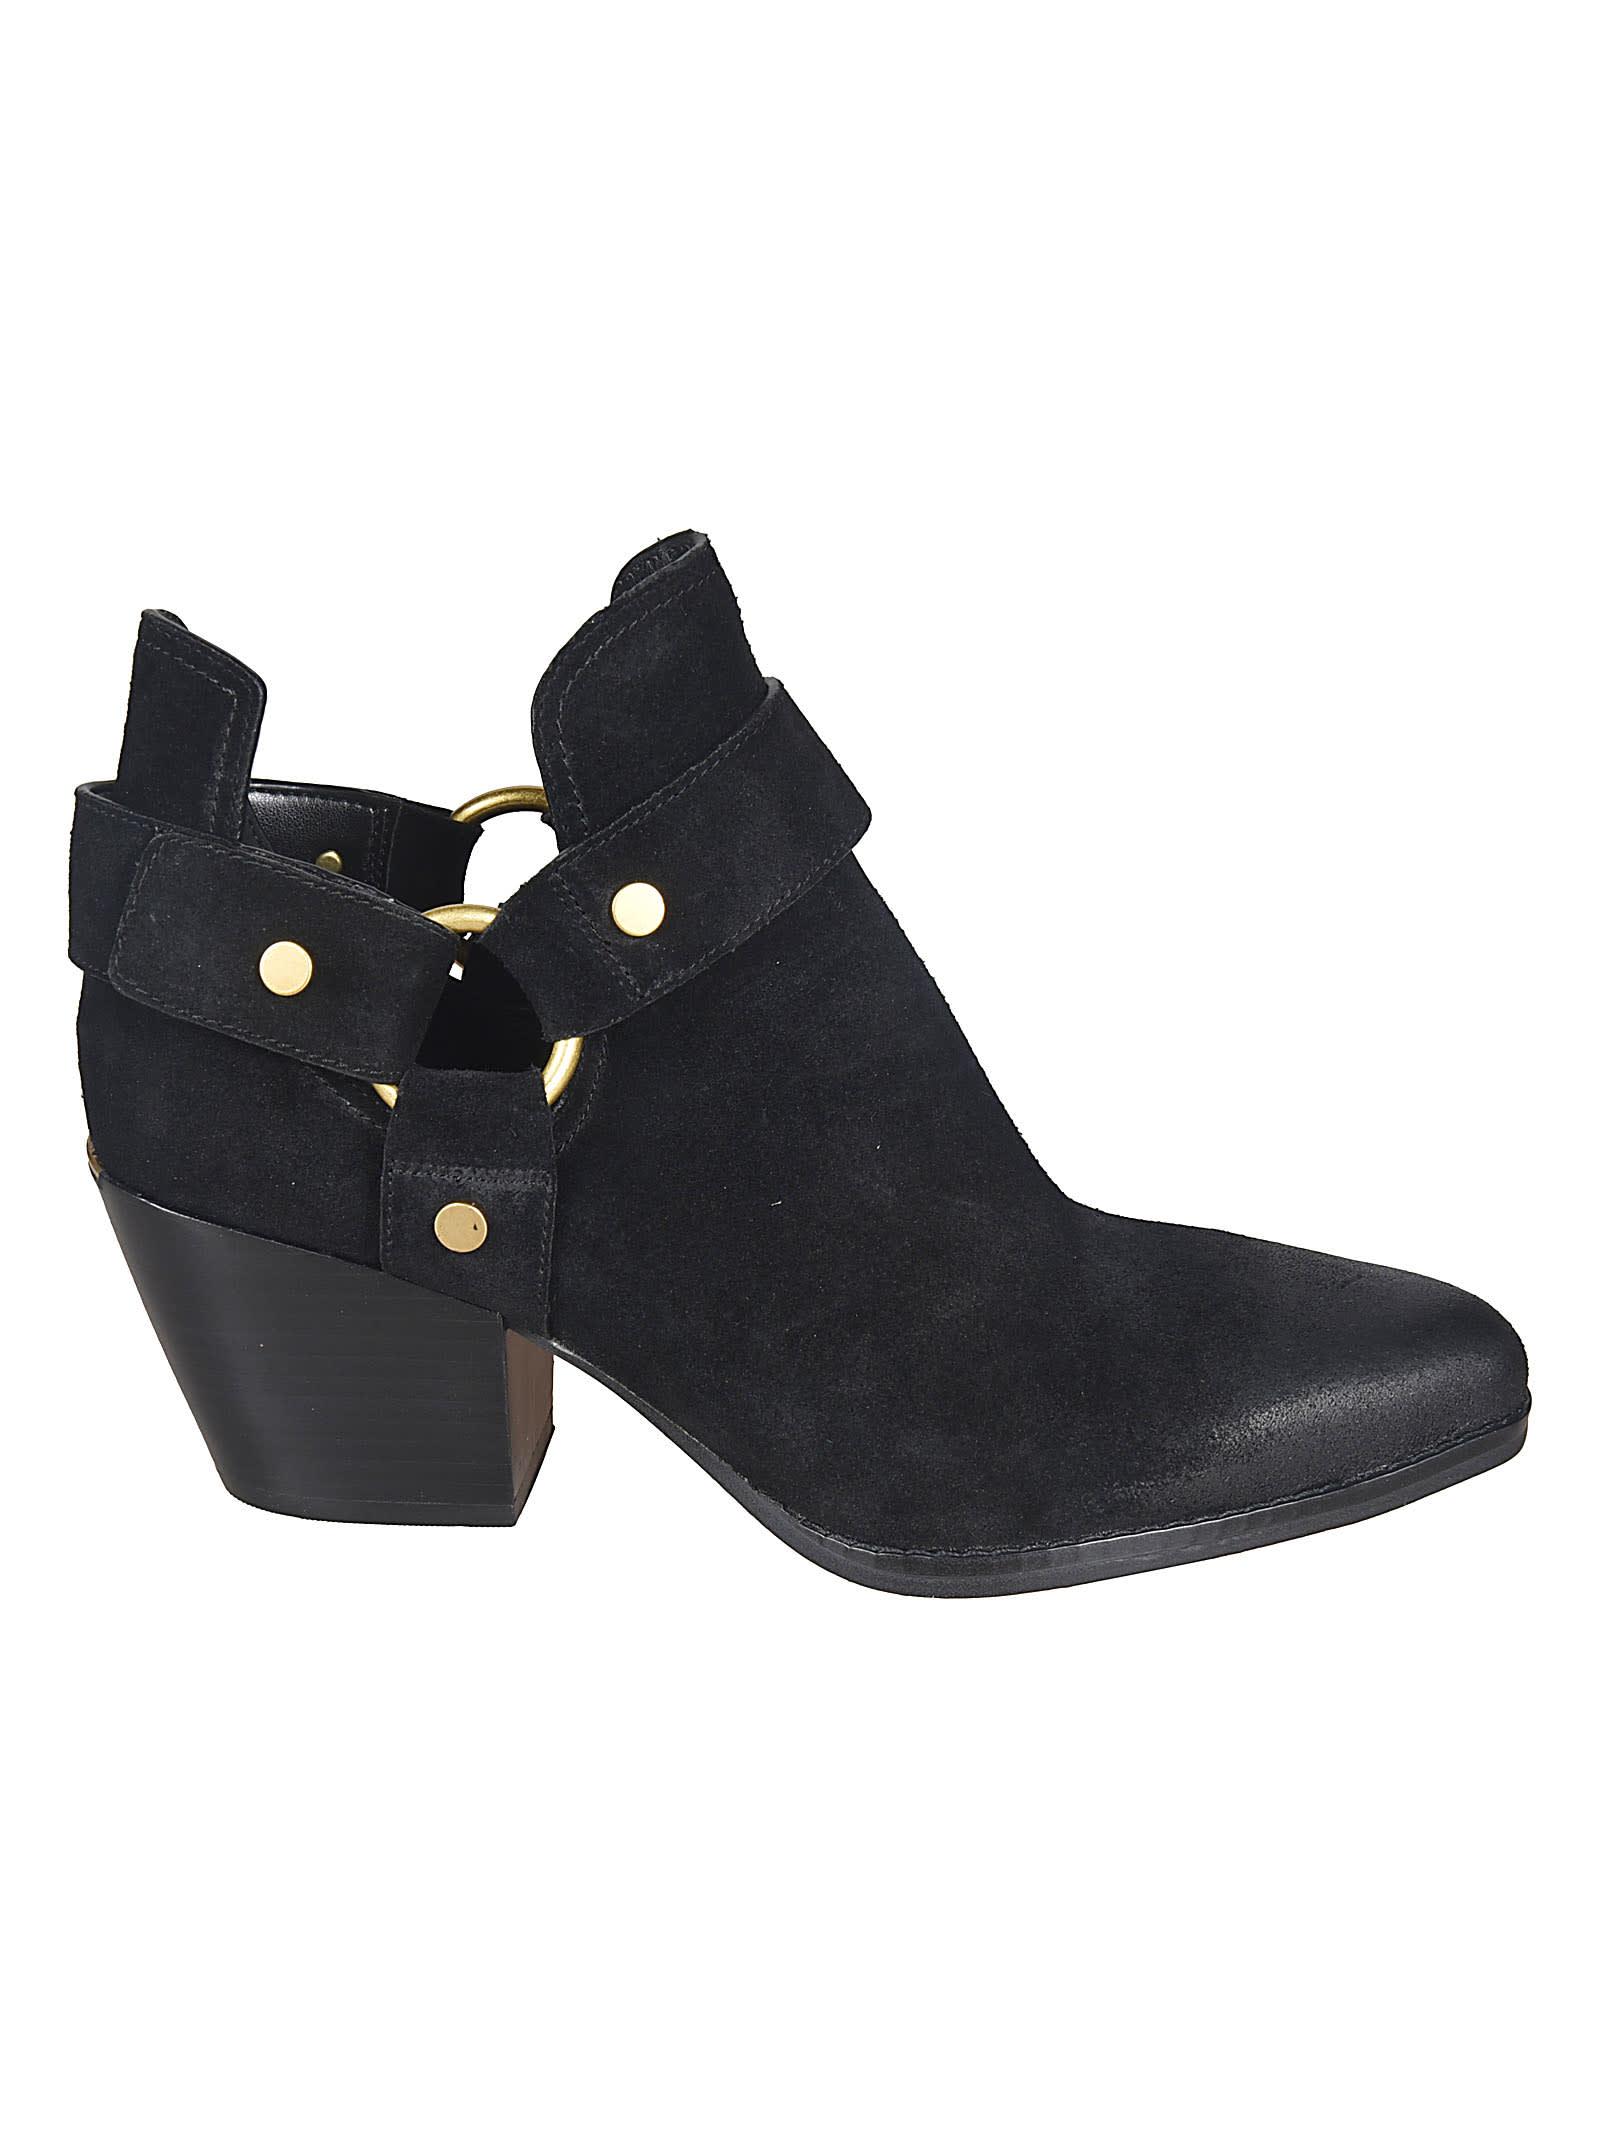 Buy Michael Kors Pamela Boots online, shop Michael Kors shoes with free shipping